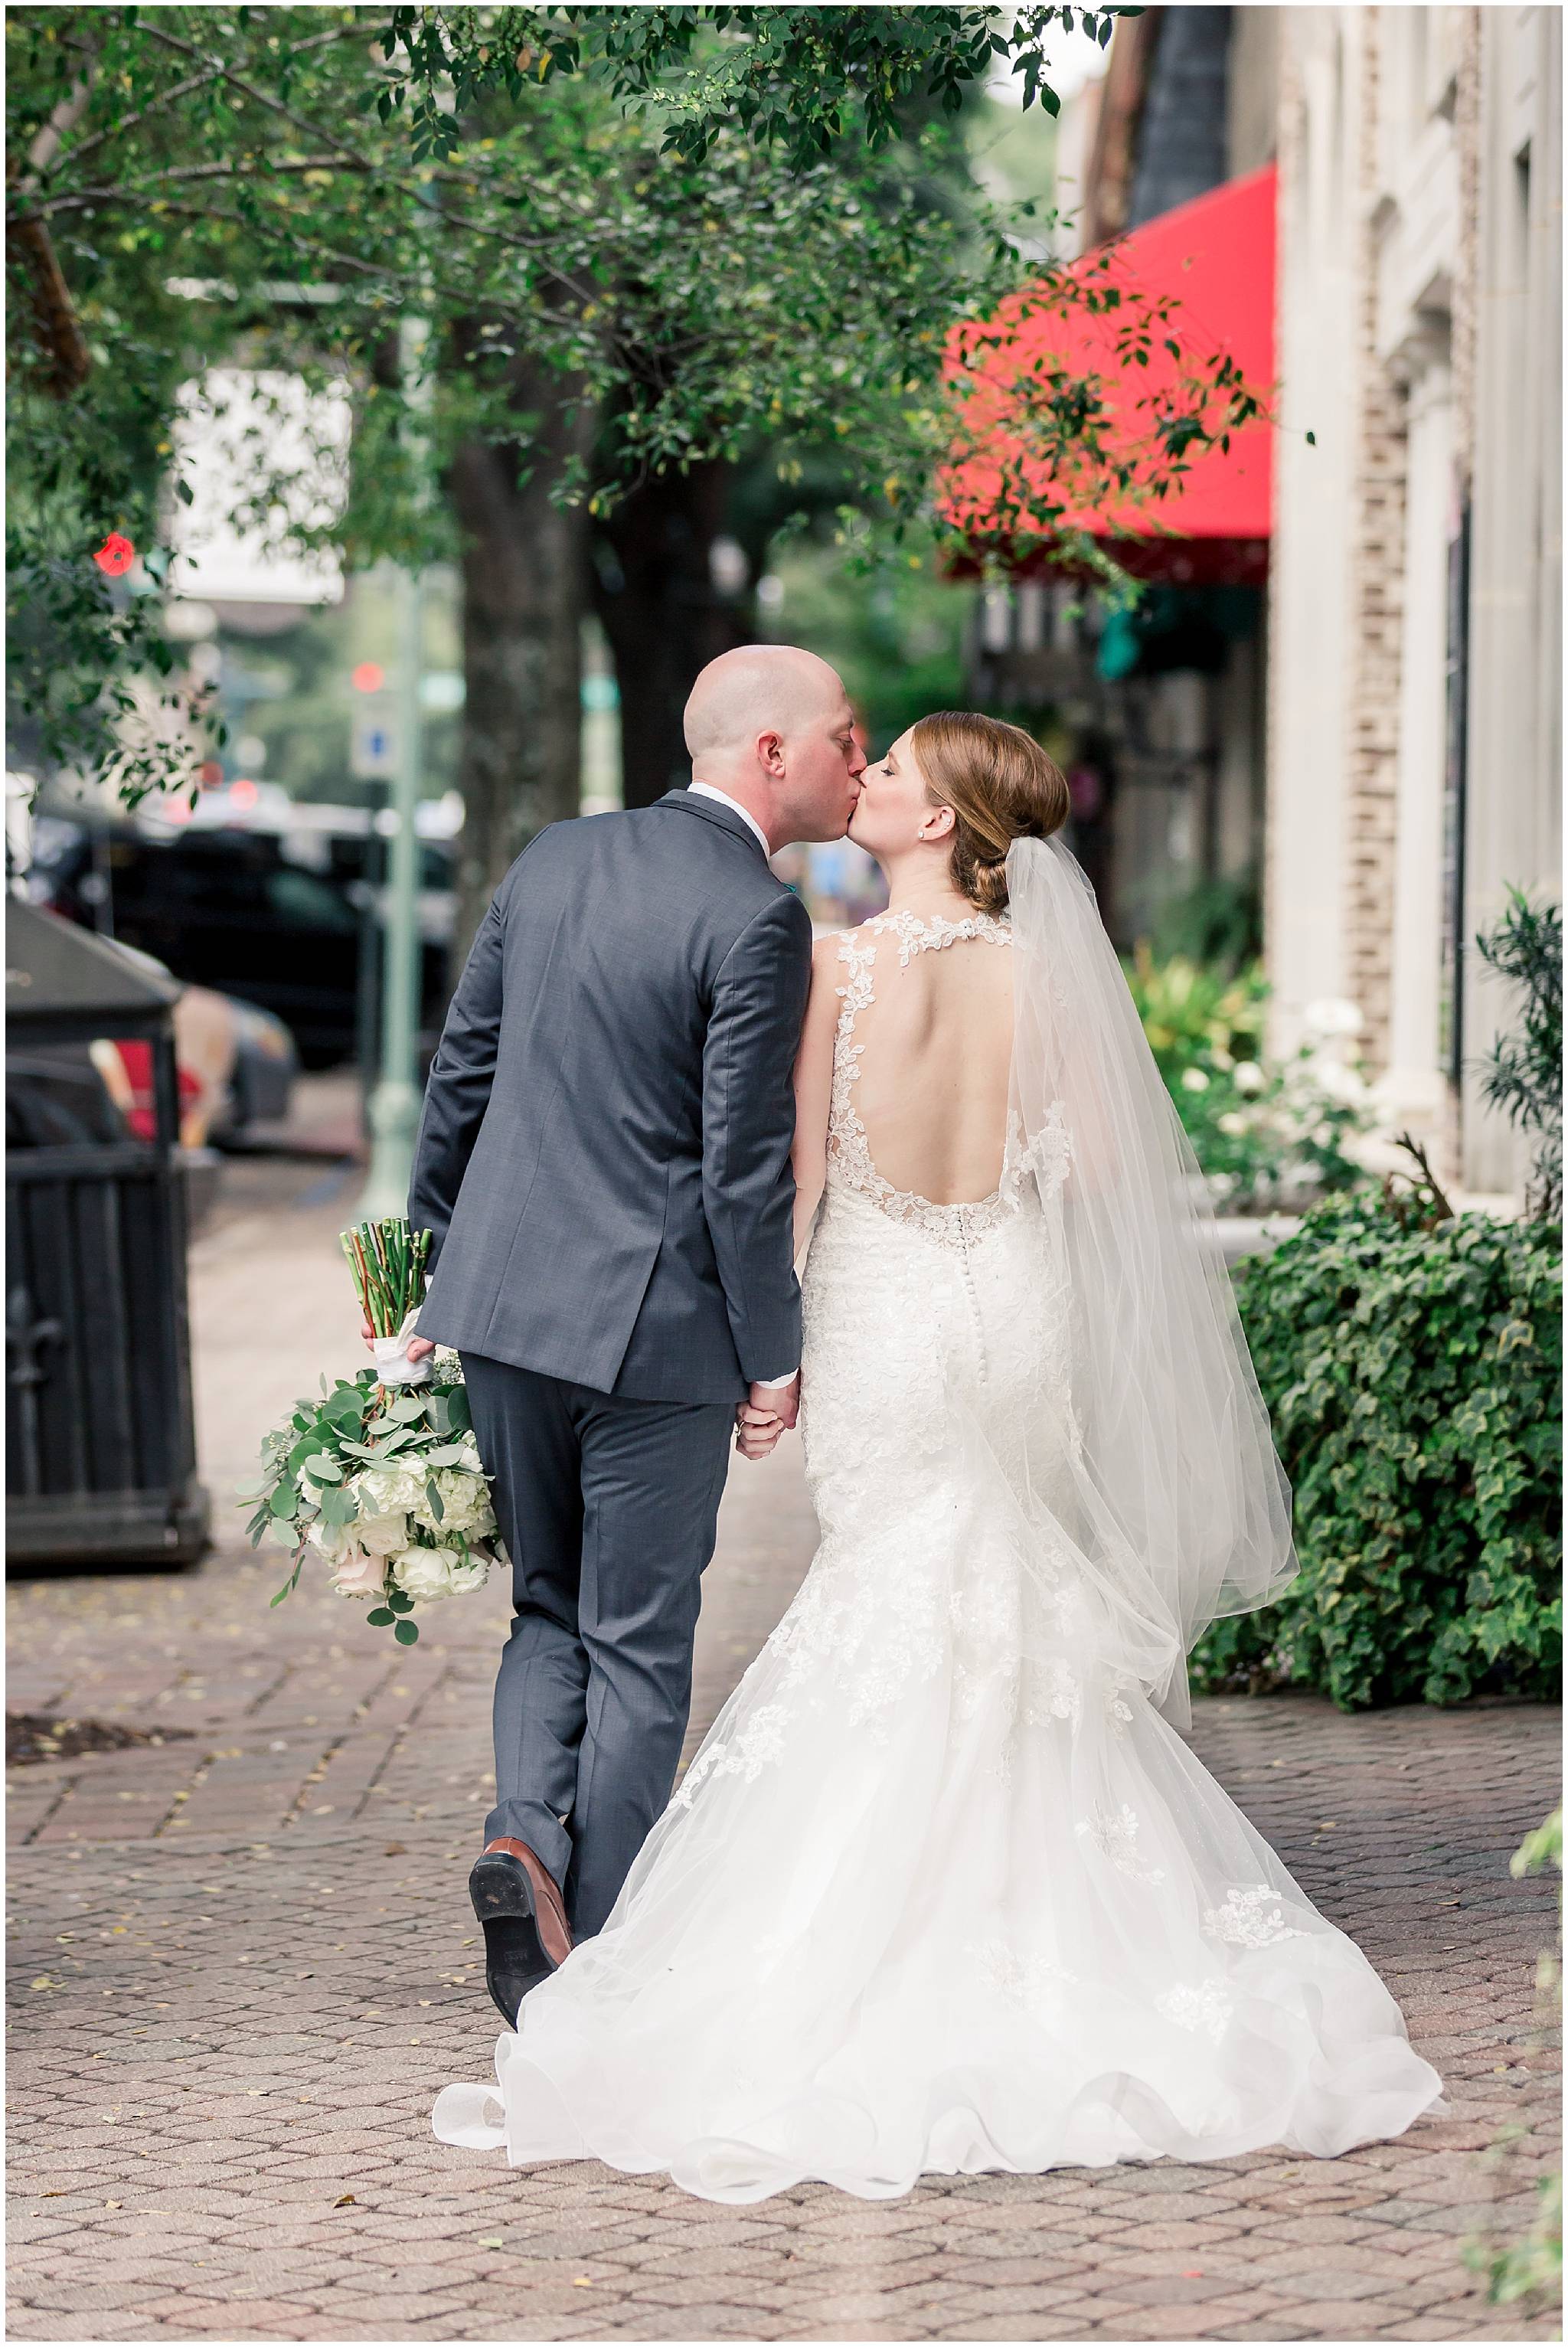 who are the best wedding photographers in north georgia ga